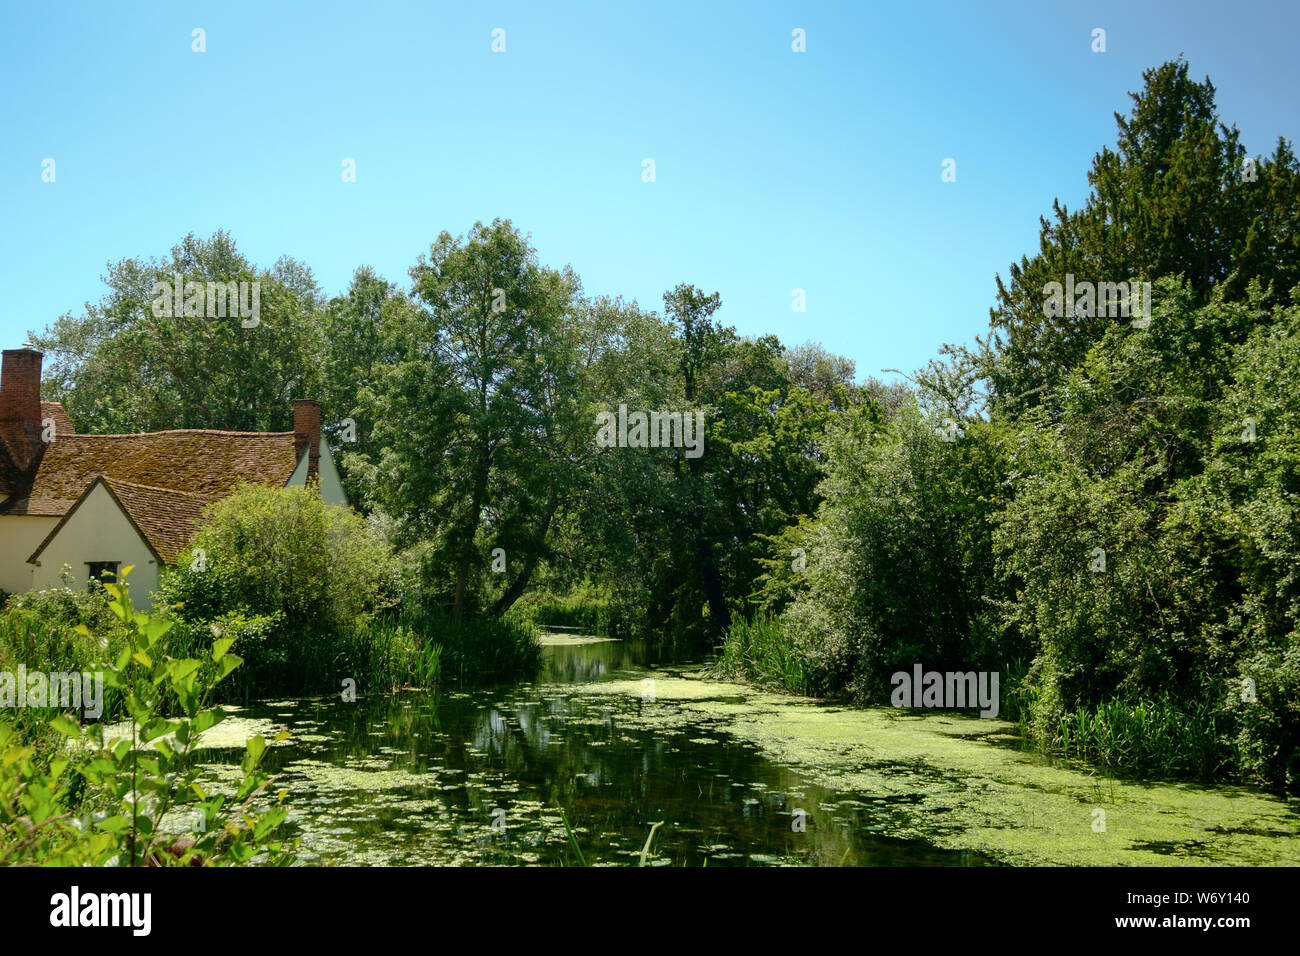 Site of Constable's Hay Wain, River Stour, Suffolk, UK Stock Photo